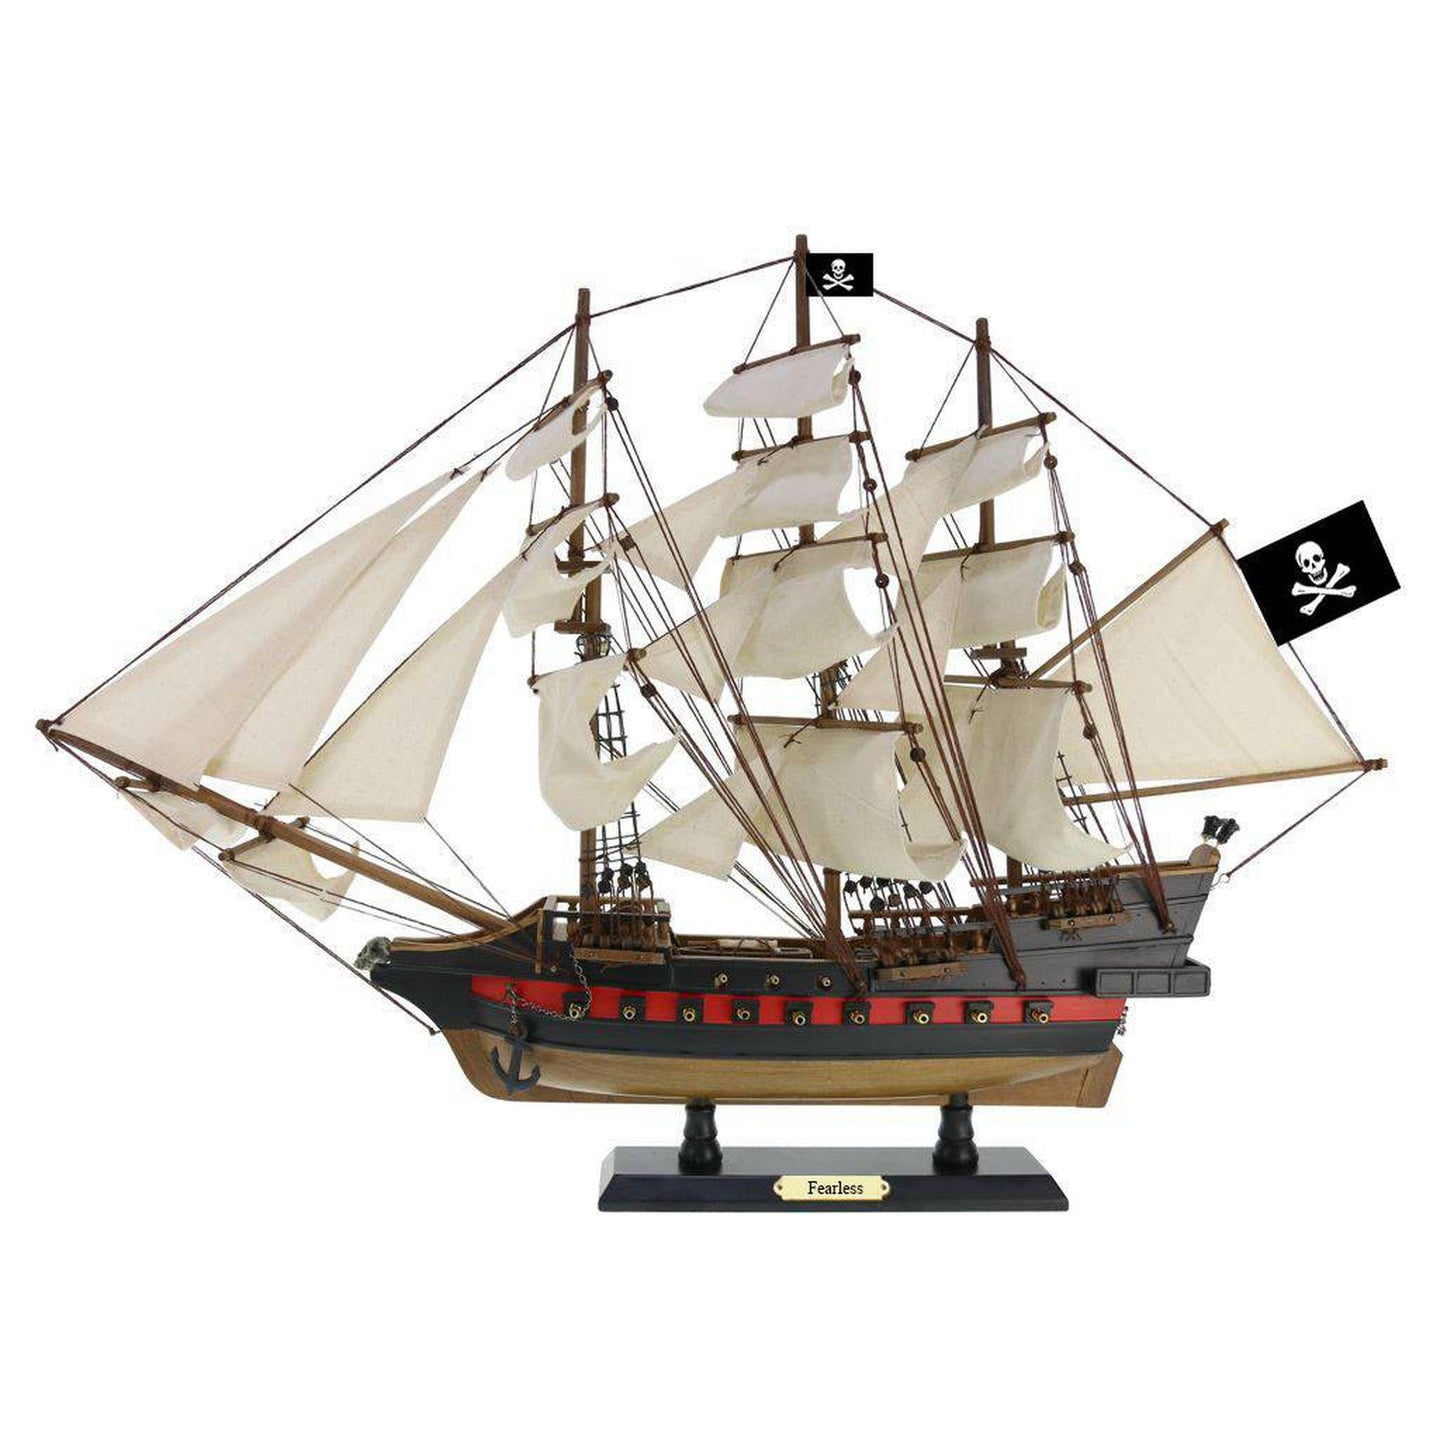 Handcrafted Model Ships Wooden Fearless White Sails Limited Model Pirate Ship 26